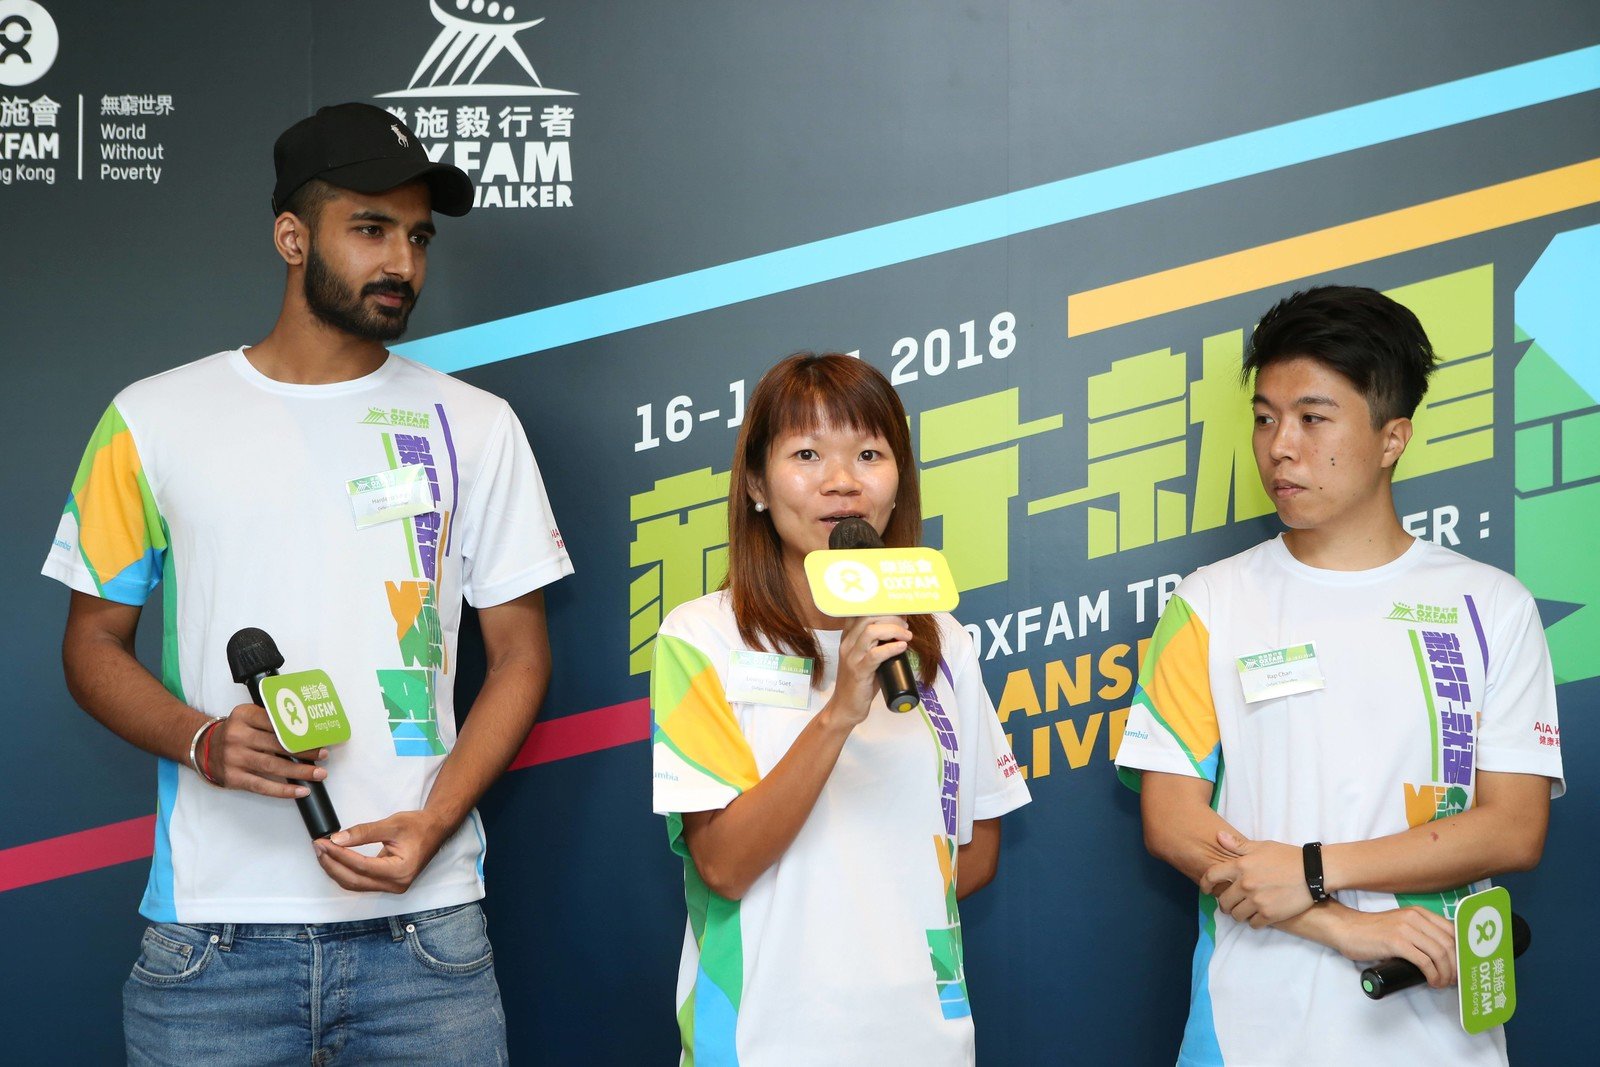 Three models from this year’s OTW poster shared their stories of transformation (left to right): Hardeep Singh, who joined OTW last year for the first time when he turned 18; Leung Ying Suet, first runner-up who broke the Mixed Team Champion record and Rap Chan, a two-time OTW participant and the creator of Dustykid. 